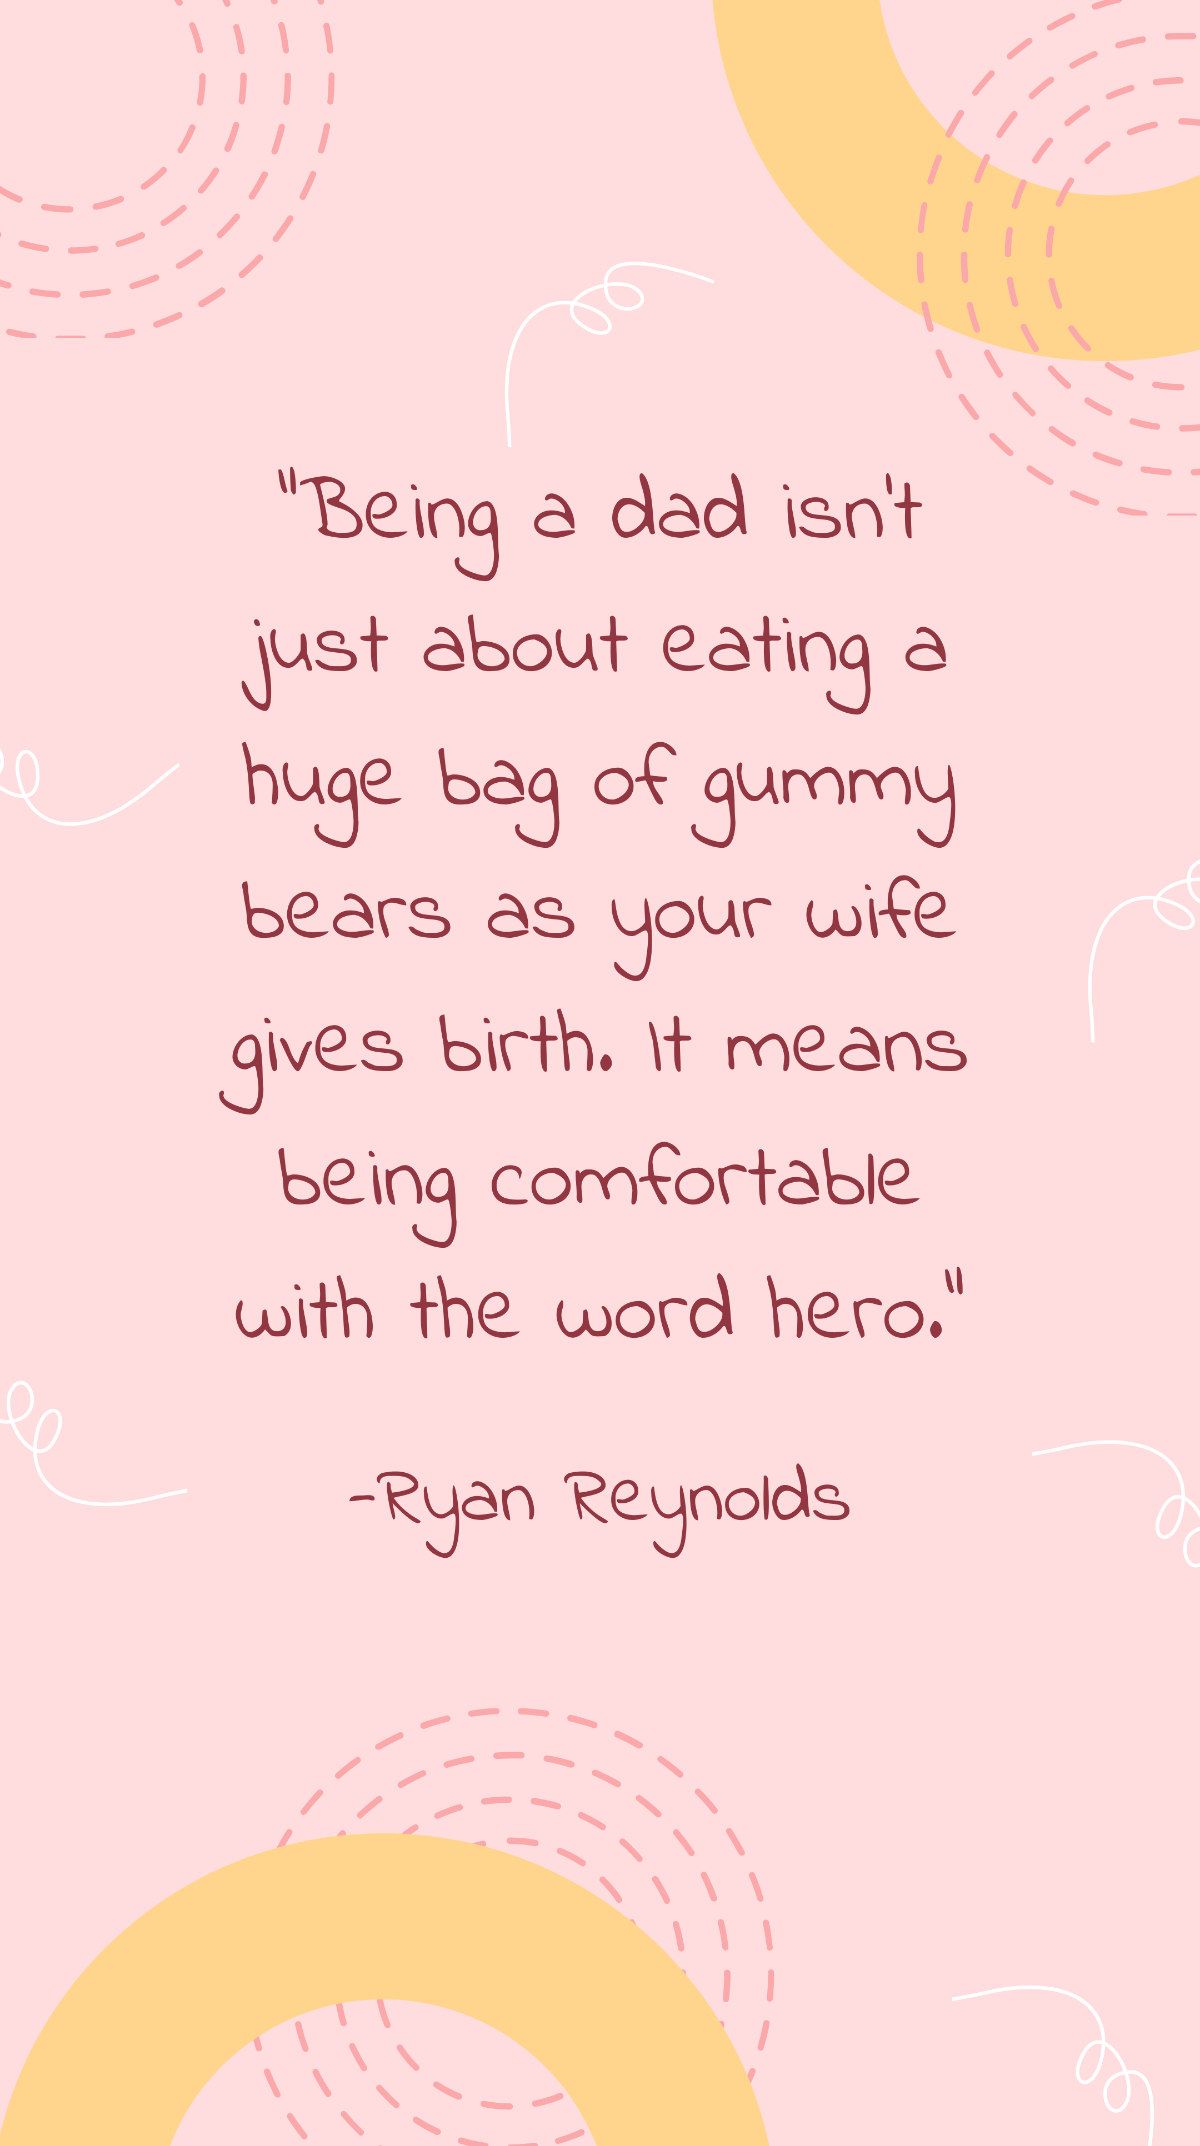 Ryan Reynolds - Being a dad isn’t just about eating a huge bag of gummy bears as your wife gives birth. It means being comfortable with the word hero. Template